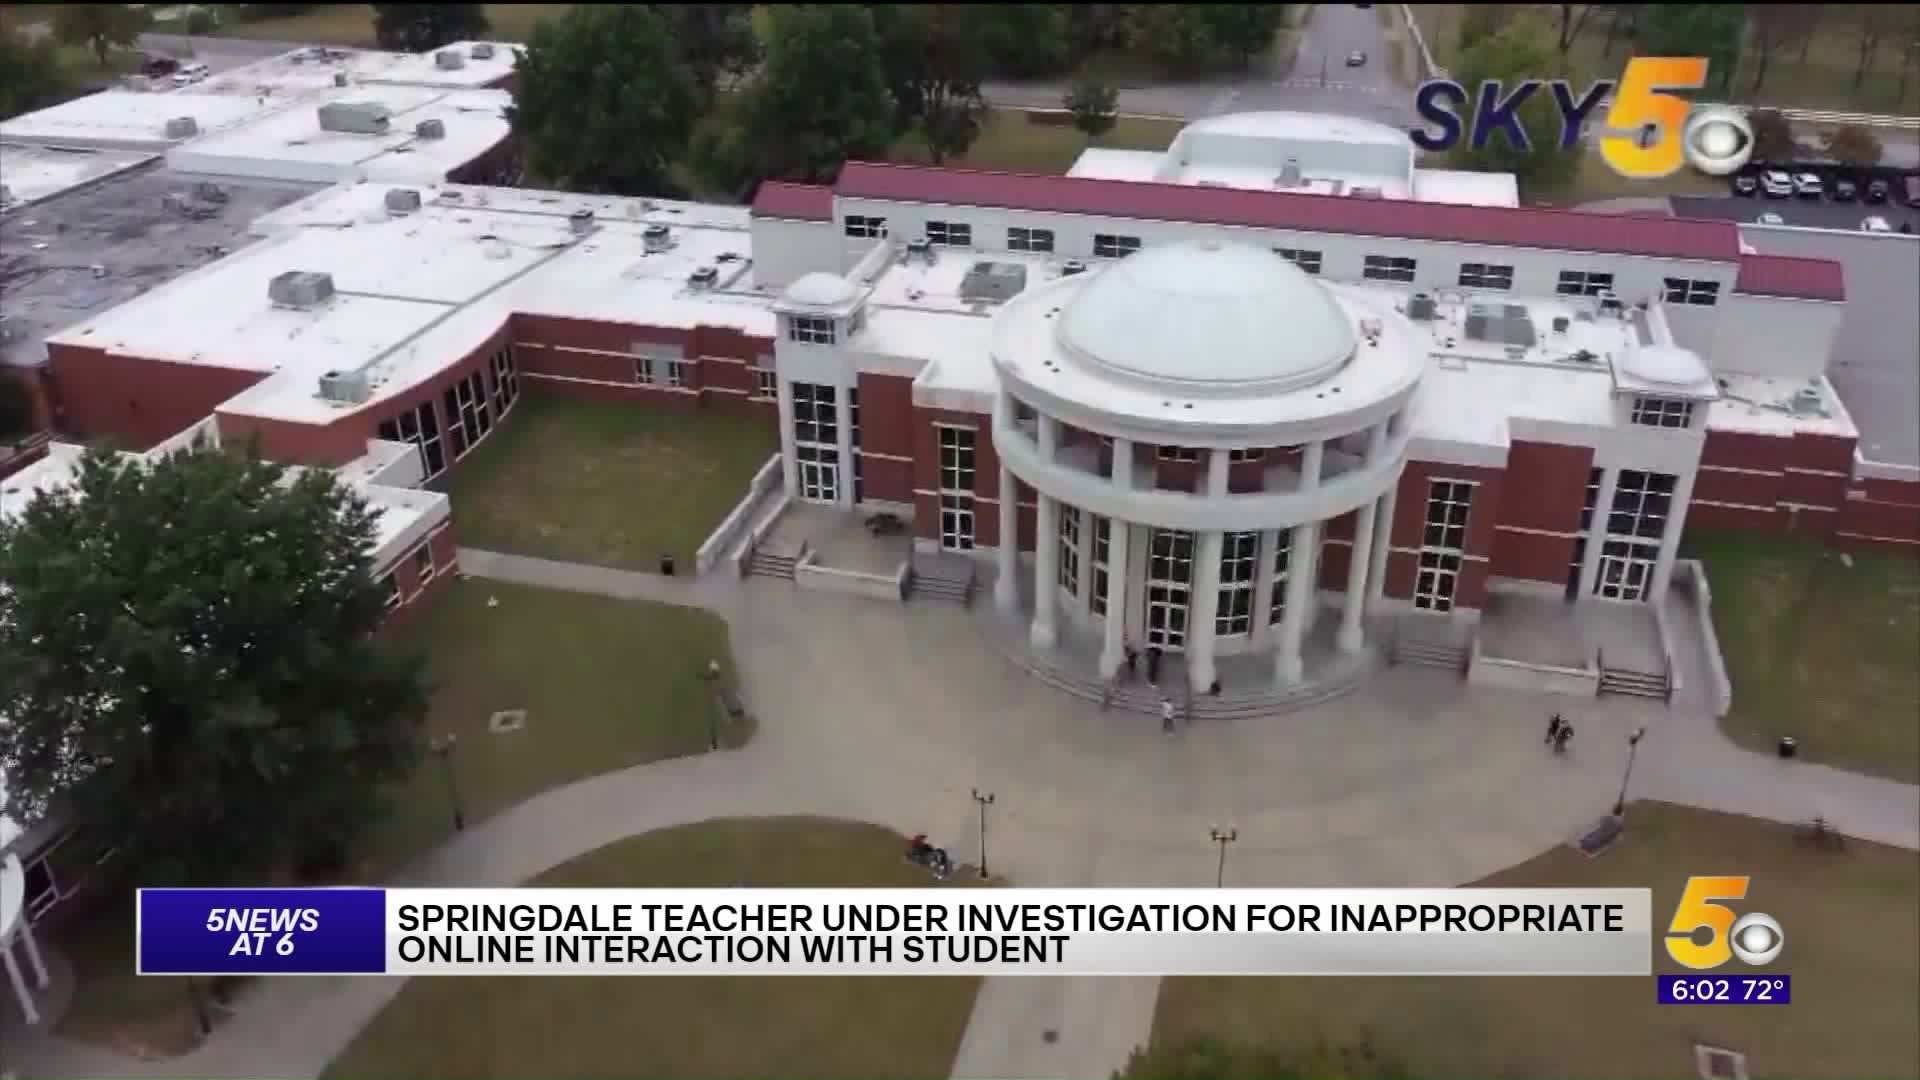 Springdale Teacher Under Investigation For Inappropriate Online Interaction With A Student